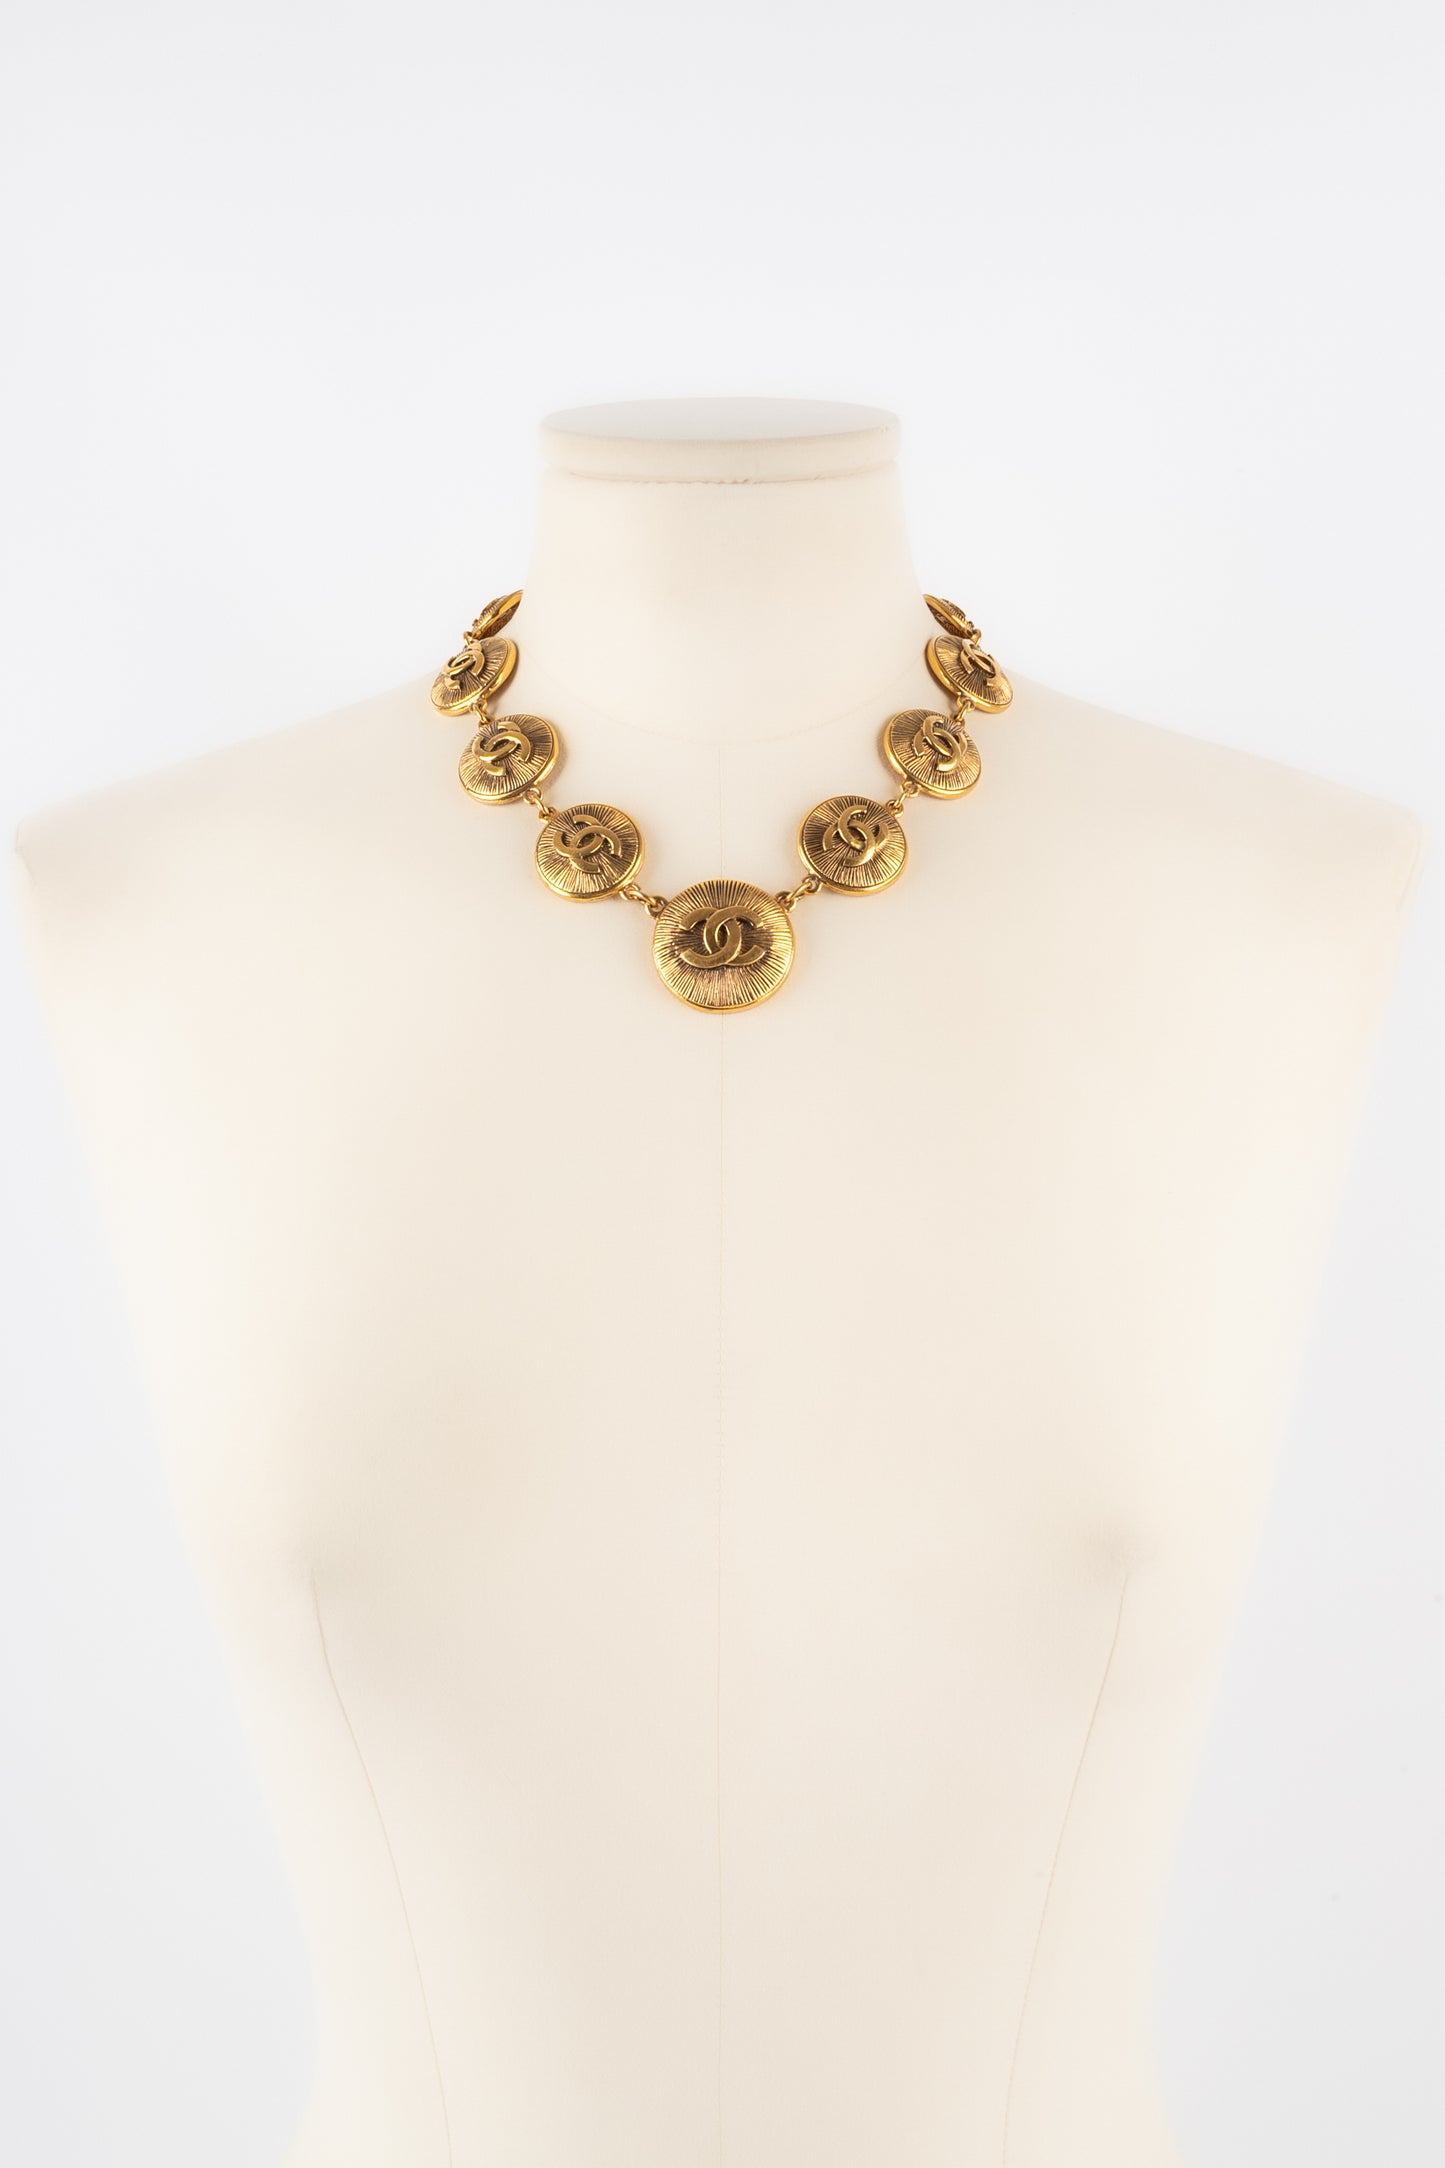 Collier Chanel 1980's